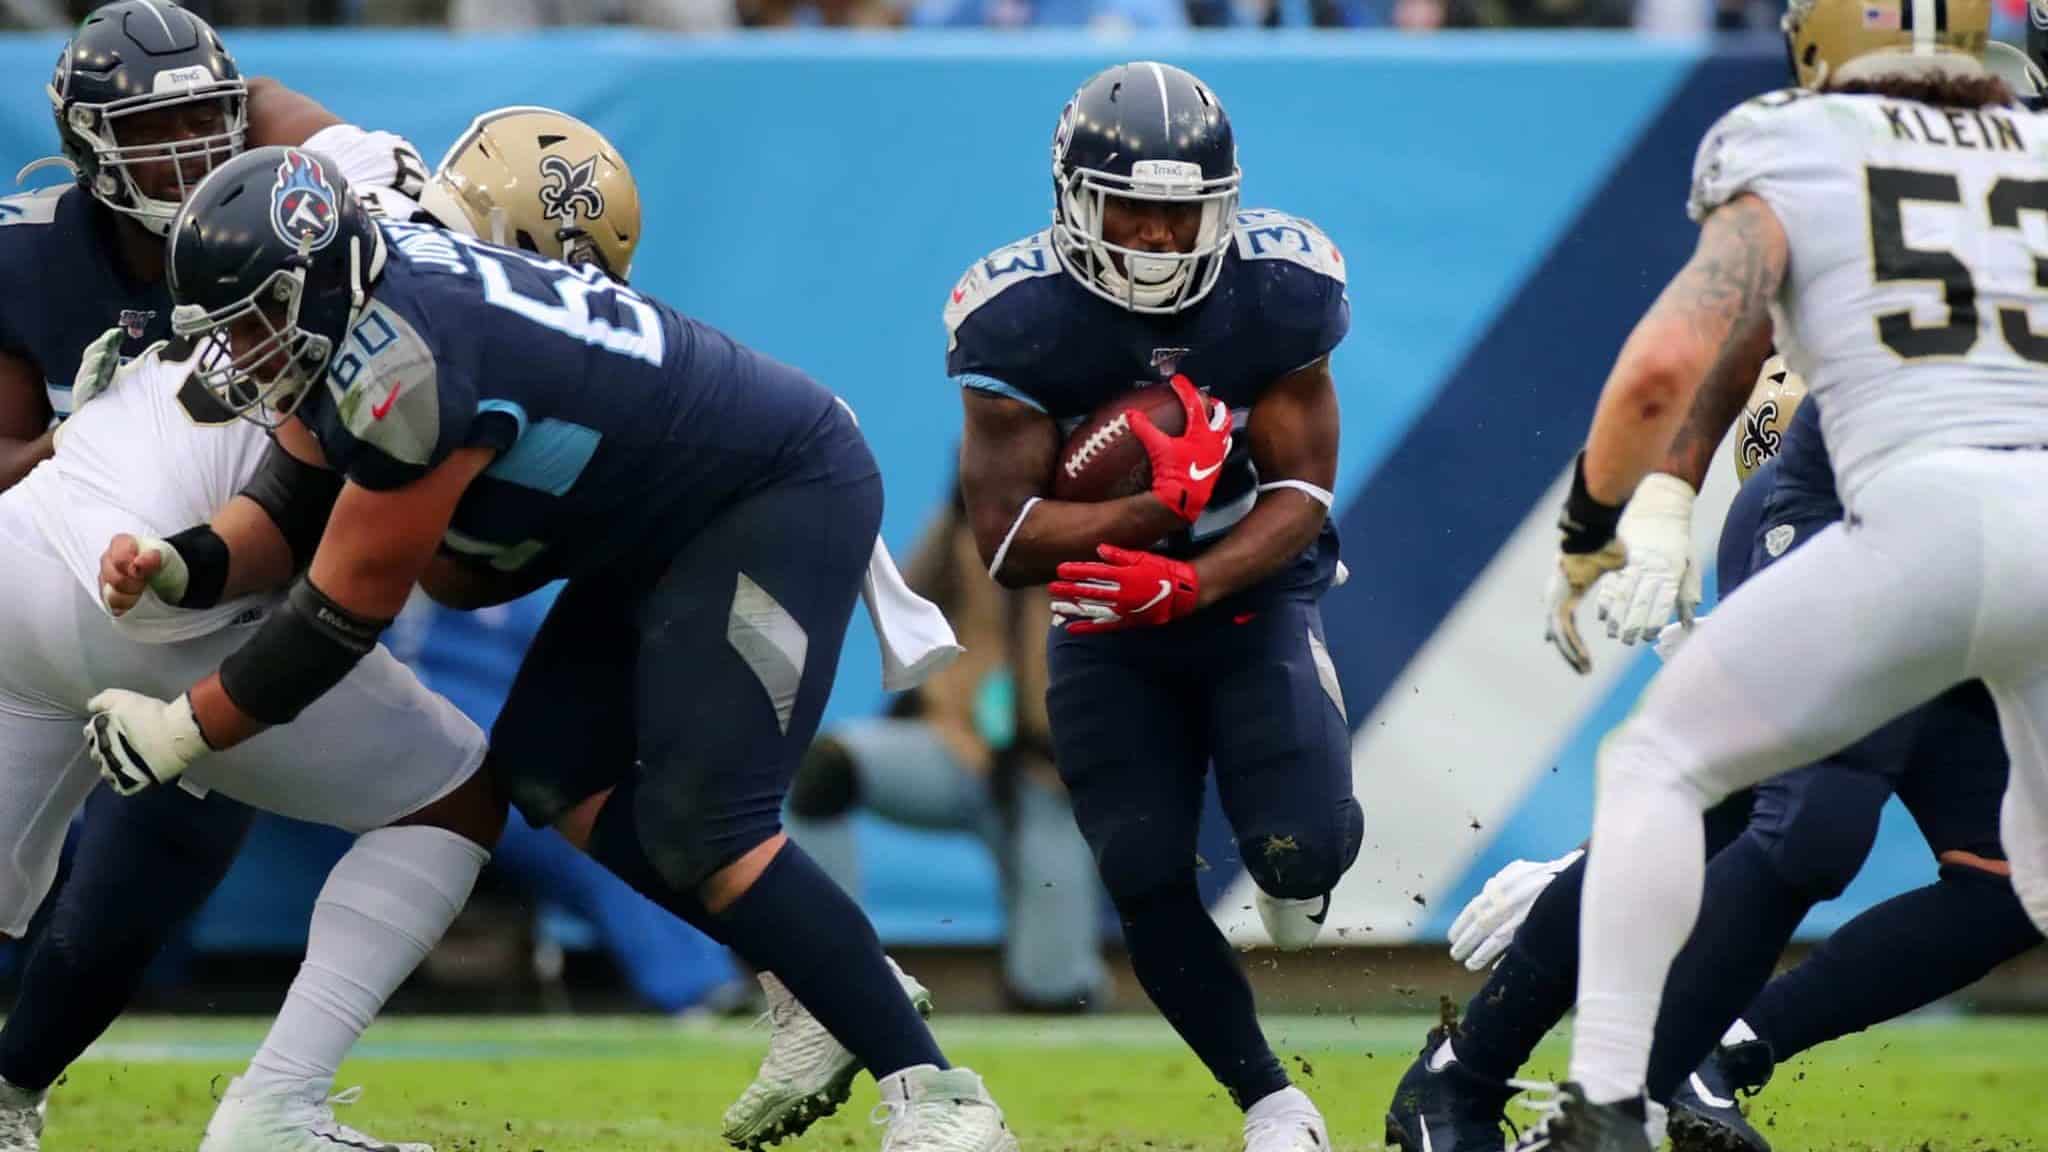 NASHVILLE, TENNESSEE - DECEMBER 22: Running back Dion Lewis #33 of the Tennessee Titans carries the ball in the second quarter against the New Orleans Saints at Nissan Stadium on December 22, 2019 in Nashville, Tennessee.